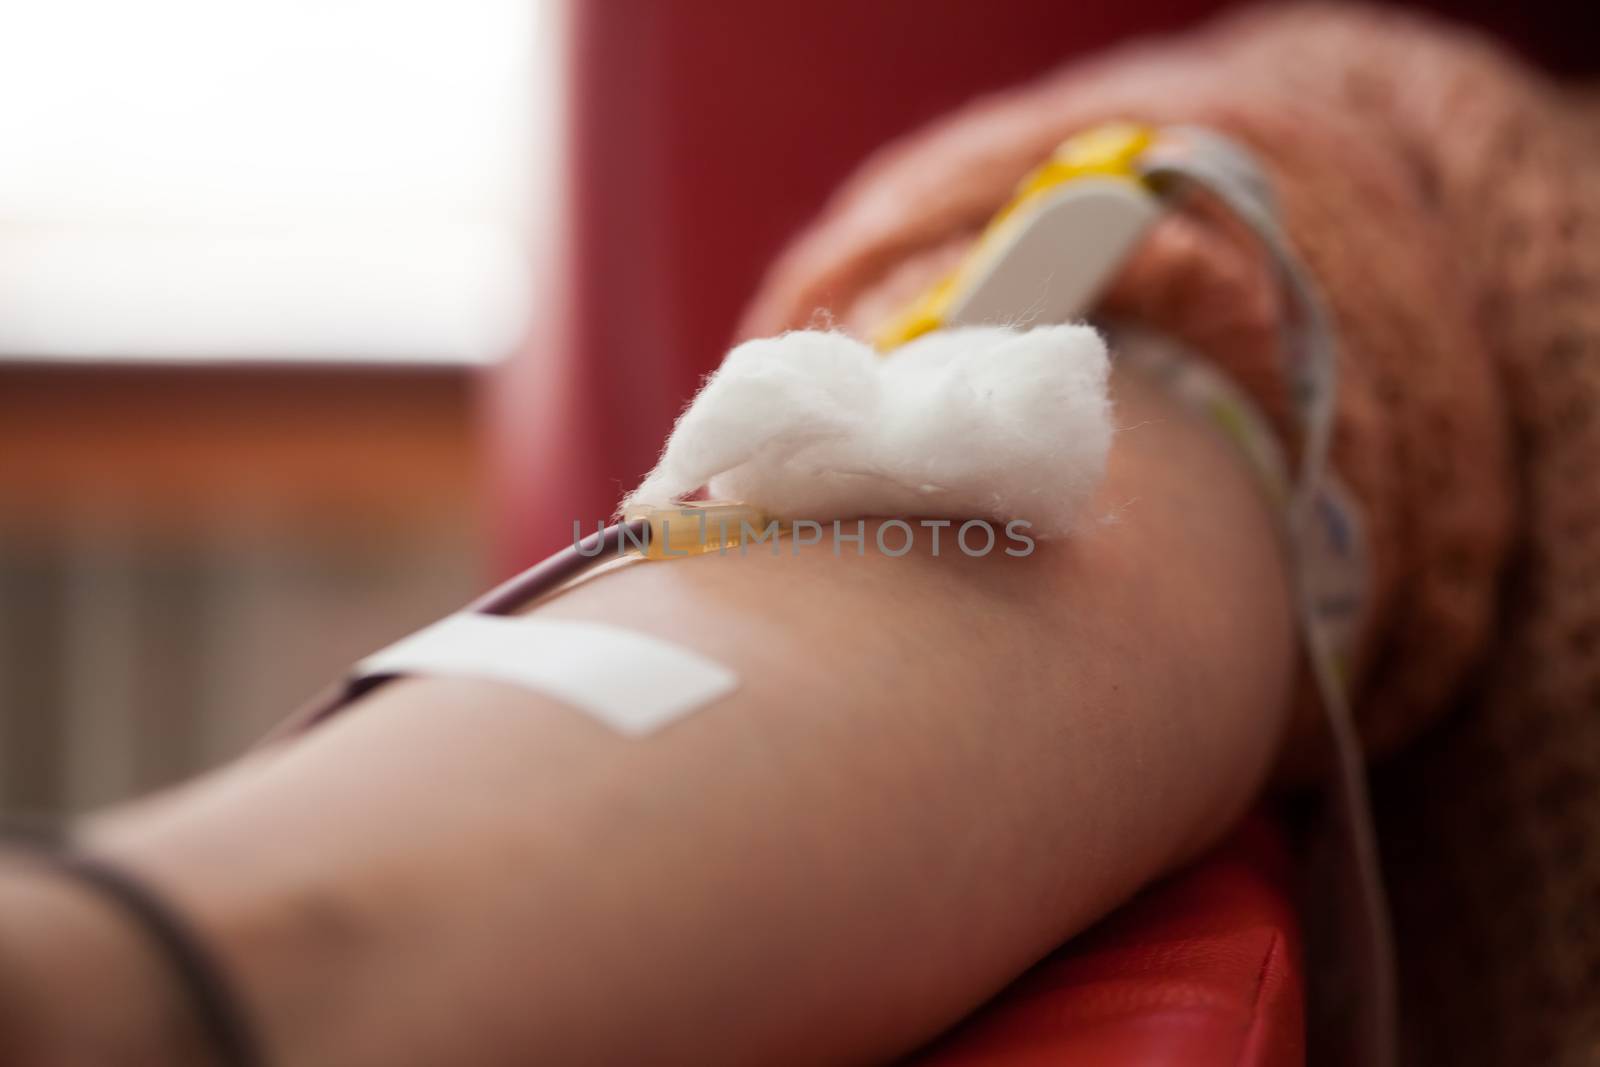 Closeup female caucasian donor hand donate PRP blood plasma,COVID-19 corona virus disease crisis,needle in vein detail,charity benevolence goodwill saving lives help those in need concept,NHS research